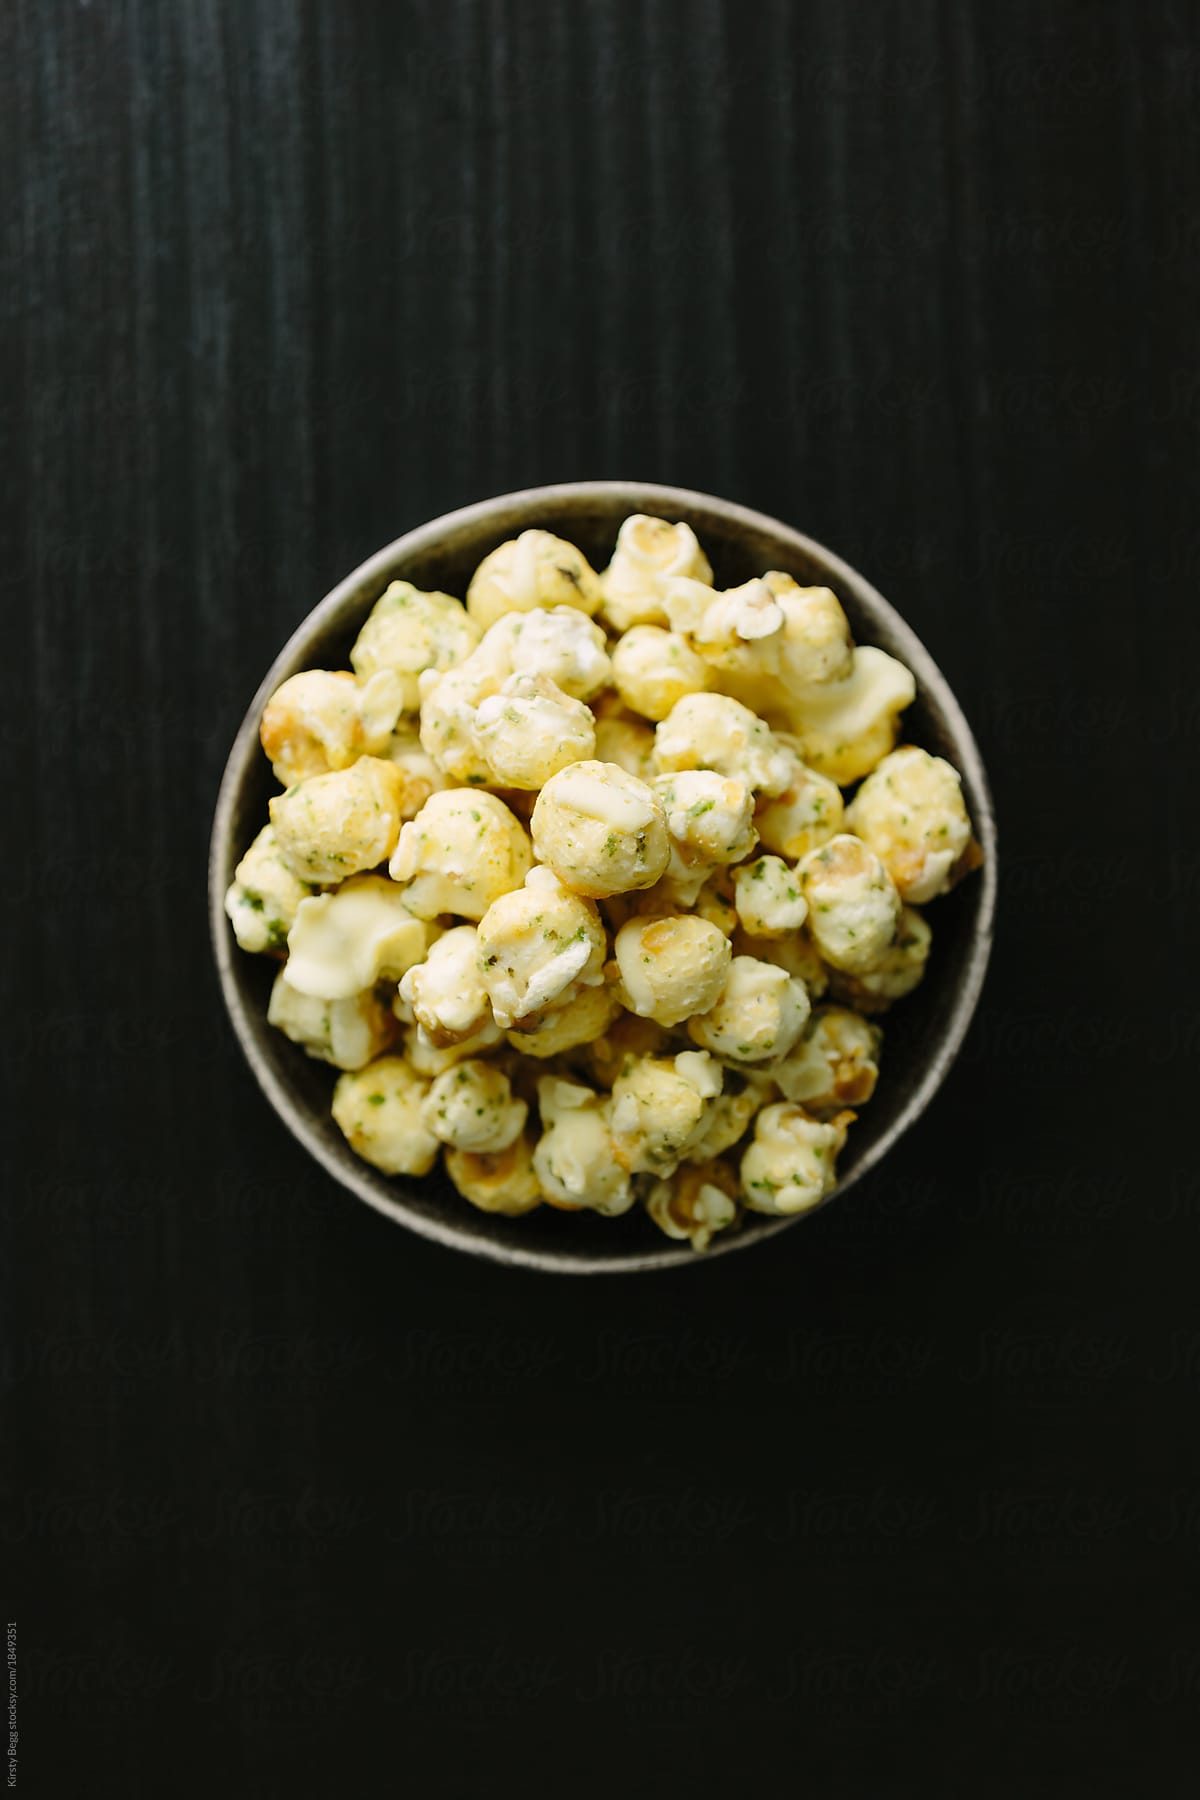 A small bowl of peppermint and white chocolate popcorn